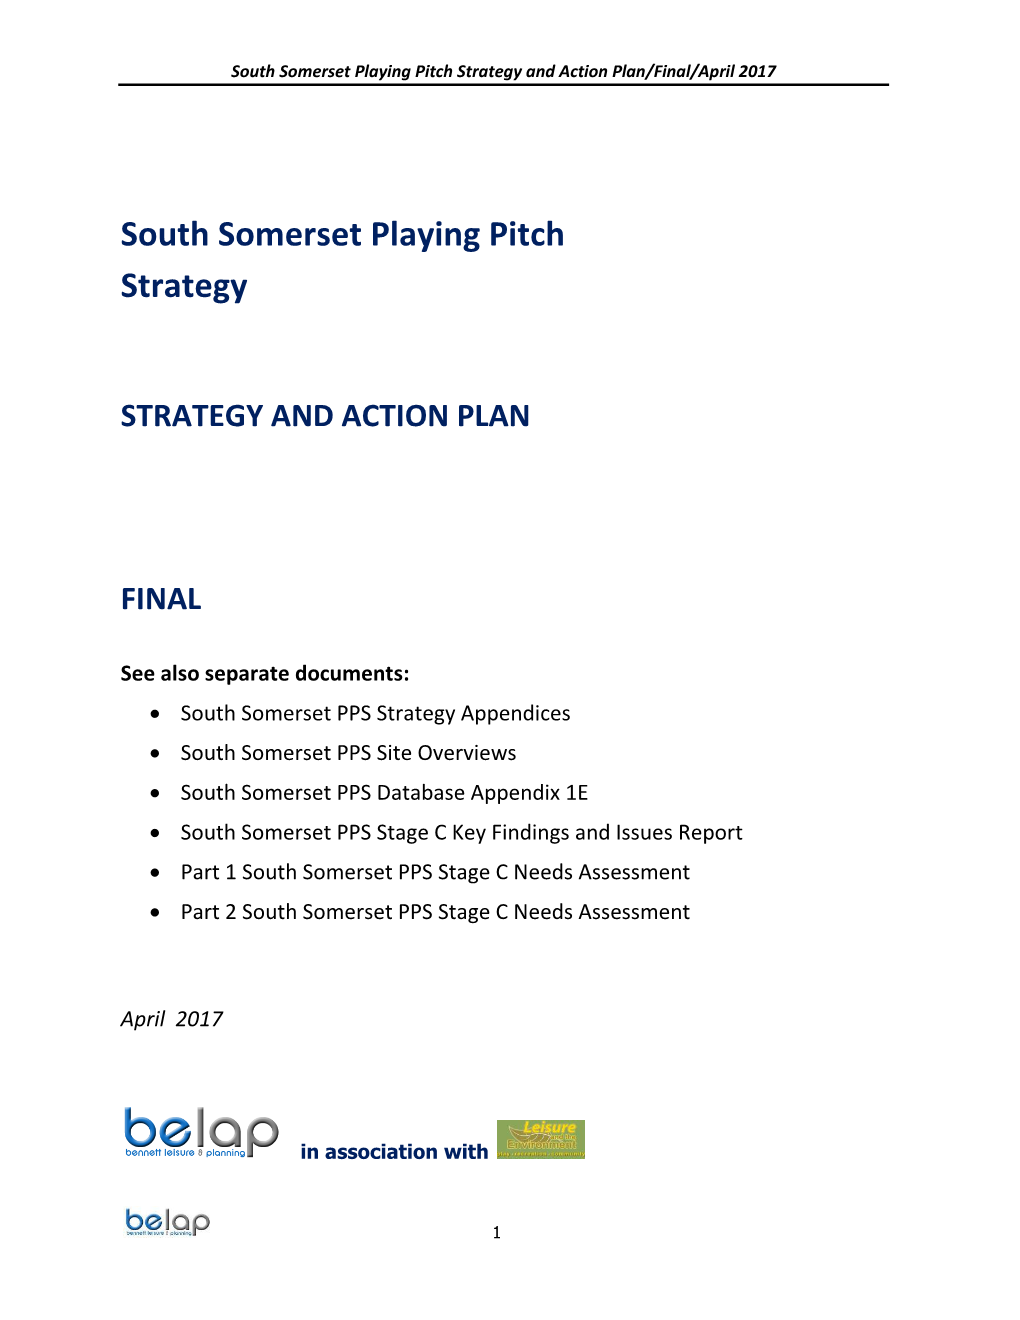 South Somerset Playing Pitch Strategy and Action Plan/Final/April 2017